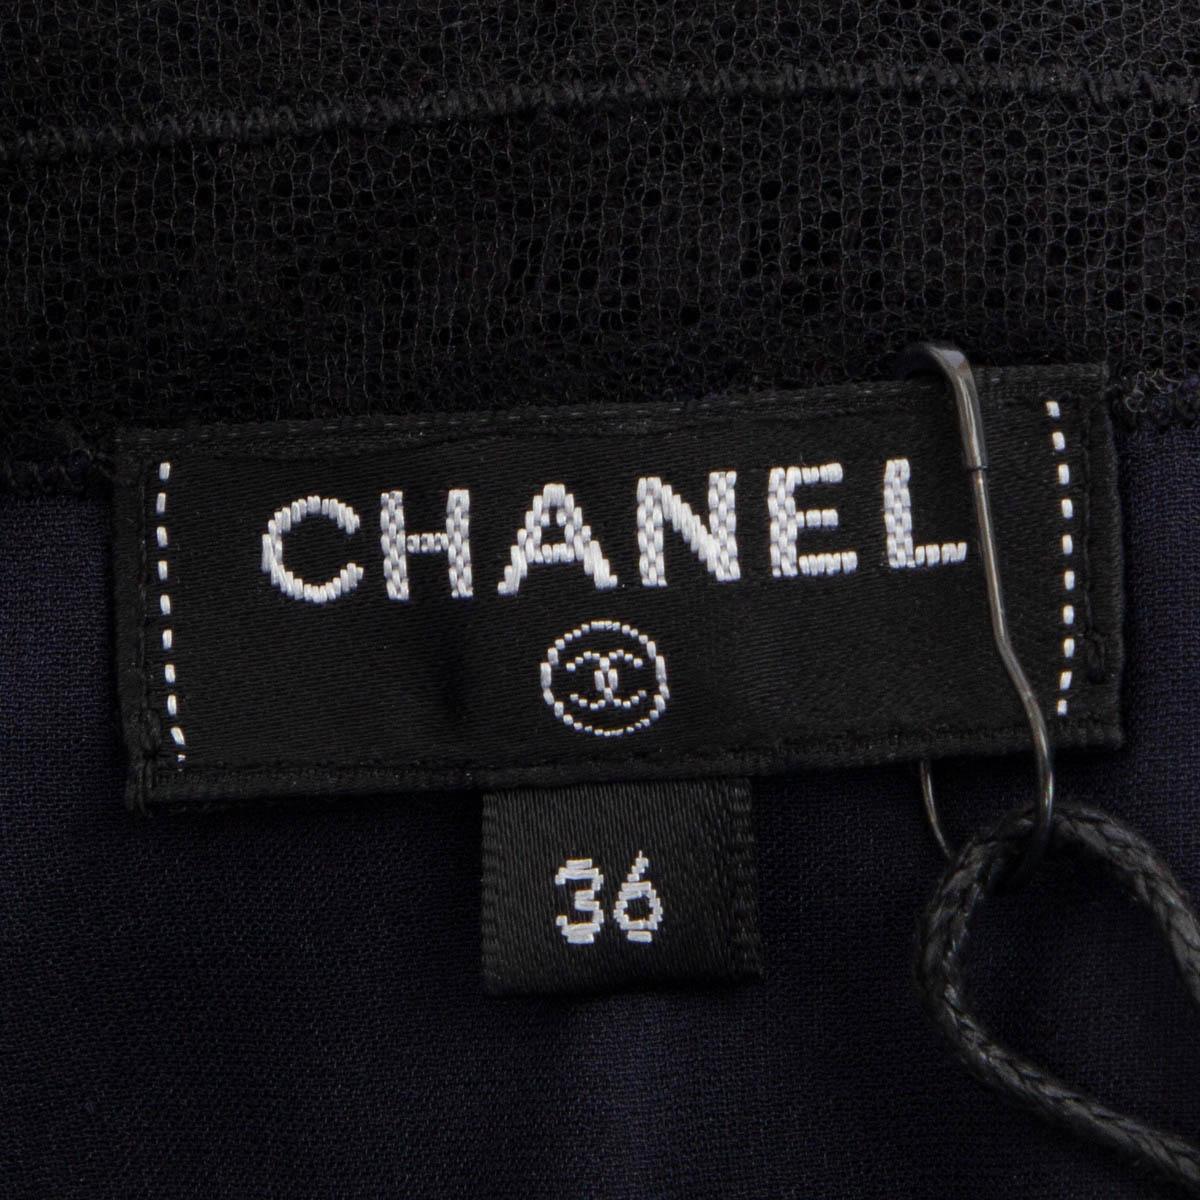 CHANEL black 2017 17S CHANTILLY LACE SLIP Dress 36 XS For Sale 4